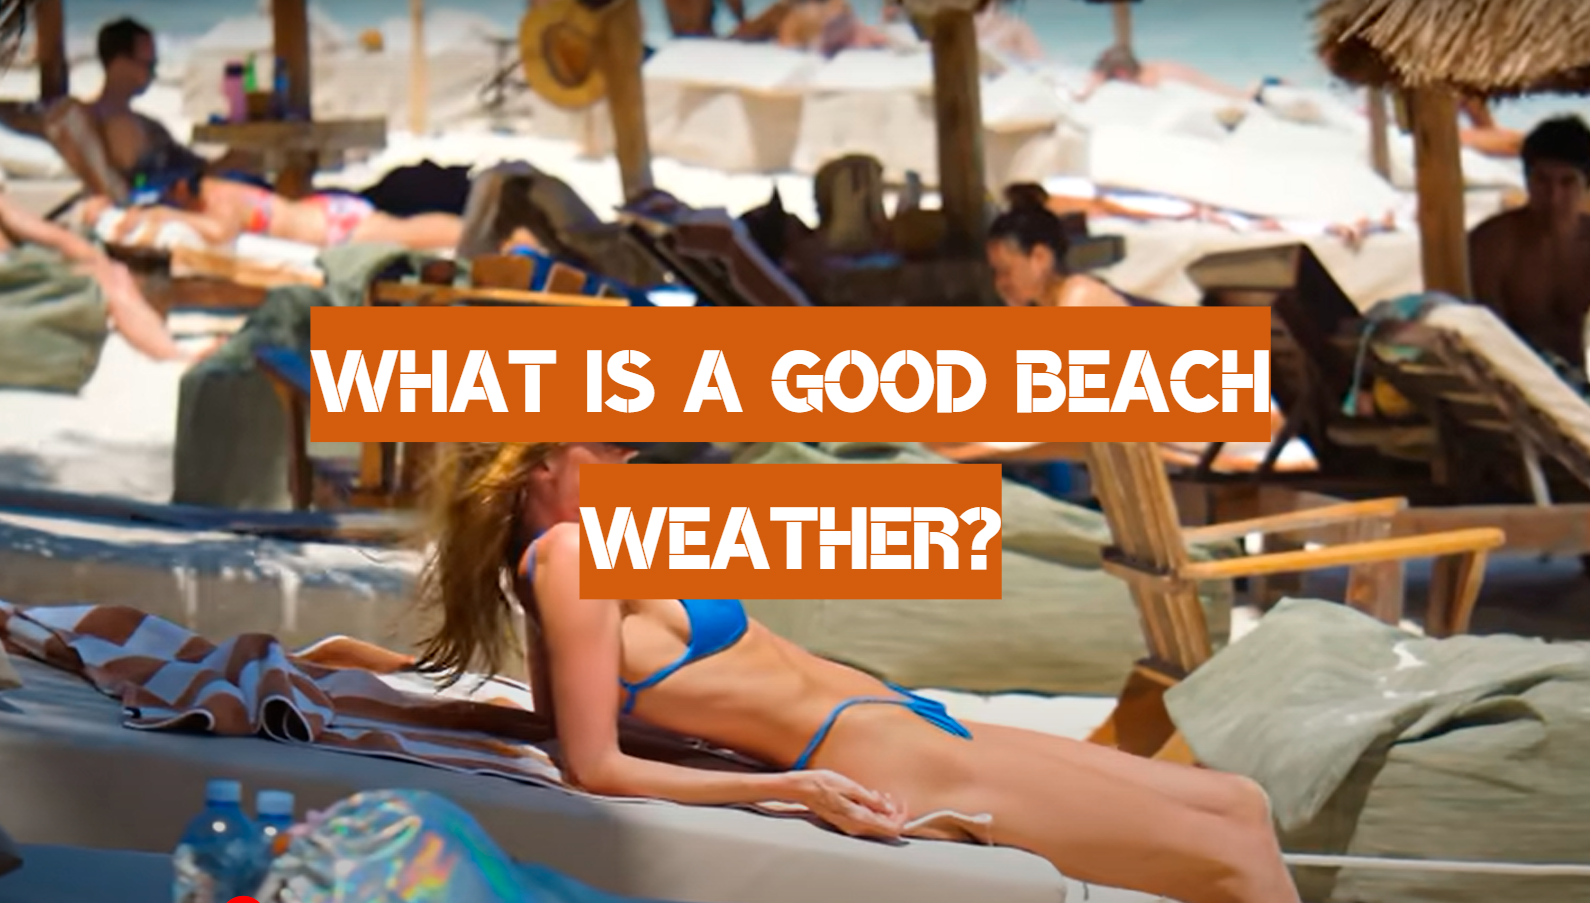 What is a Good Beach Weather?